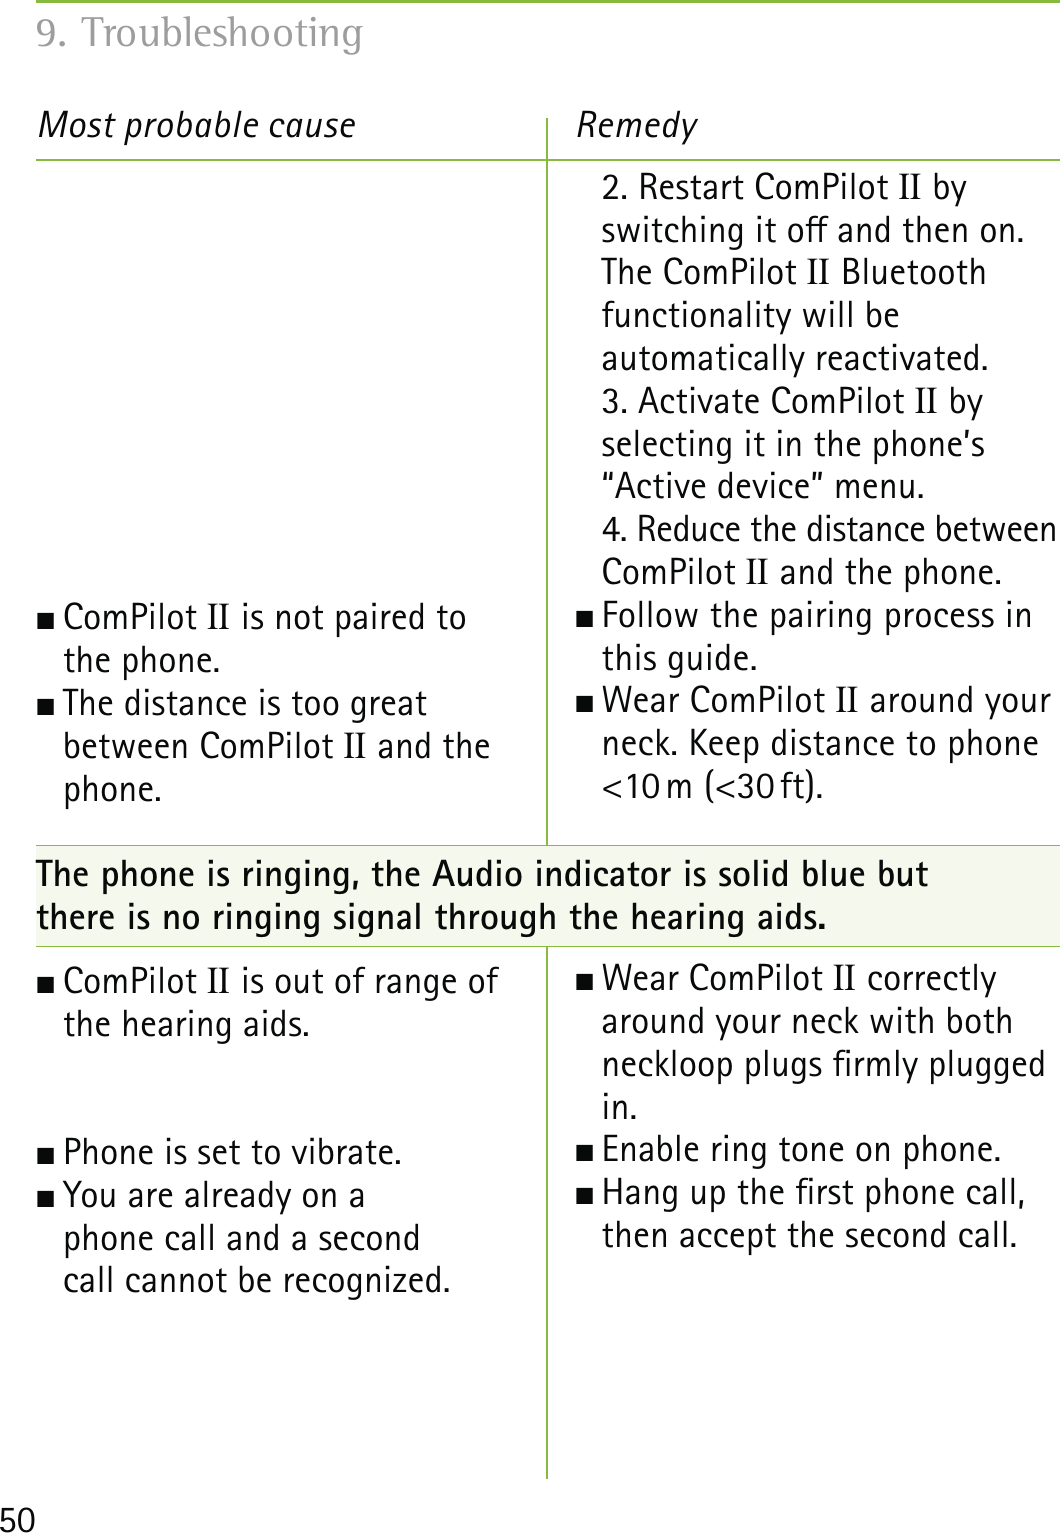 50Most probable cause Remedy ComPilot II is not paired to  the phone. The distance is too great  between ComPilot II and the  phone.The phone is ringing, the Audio indicator is solid blue but  there is no ringing signal through the hearing aids. ComPilot II is out of range of  the hearing aids. Phone is set to vibrate. You are already on a  phone call and a second  call cannot be recognized.  2. Restart ComPilot II by  switching it o and then on. The ComPilot II Bluetooth functionality will be  automatically reactivated.  3. Activate ComPilot II by  selecting it in the phone’s “Active device” menu.  4. Reduce the distance between ComPilot II and the phone. Follow the pairing process in this guide. Wear  ComPilot II around your neck. Keep distance to phone &lt;10 m  (&lt;30 ft). Wear ComPilot II correctly around your neck with both neckloop plugs rmly plugged in. Enable ring tone on phone. Hang up the rst phone call, then accept the second call. 9. Troubleshooting